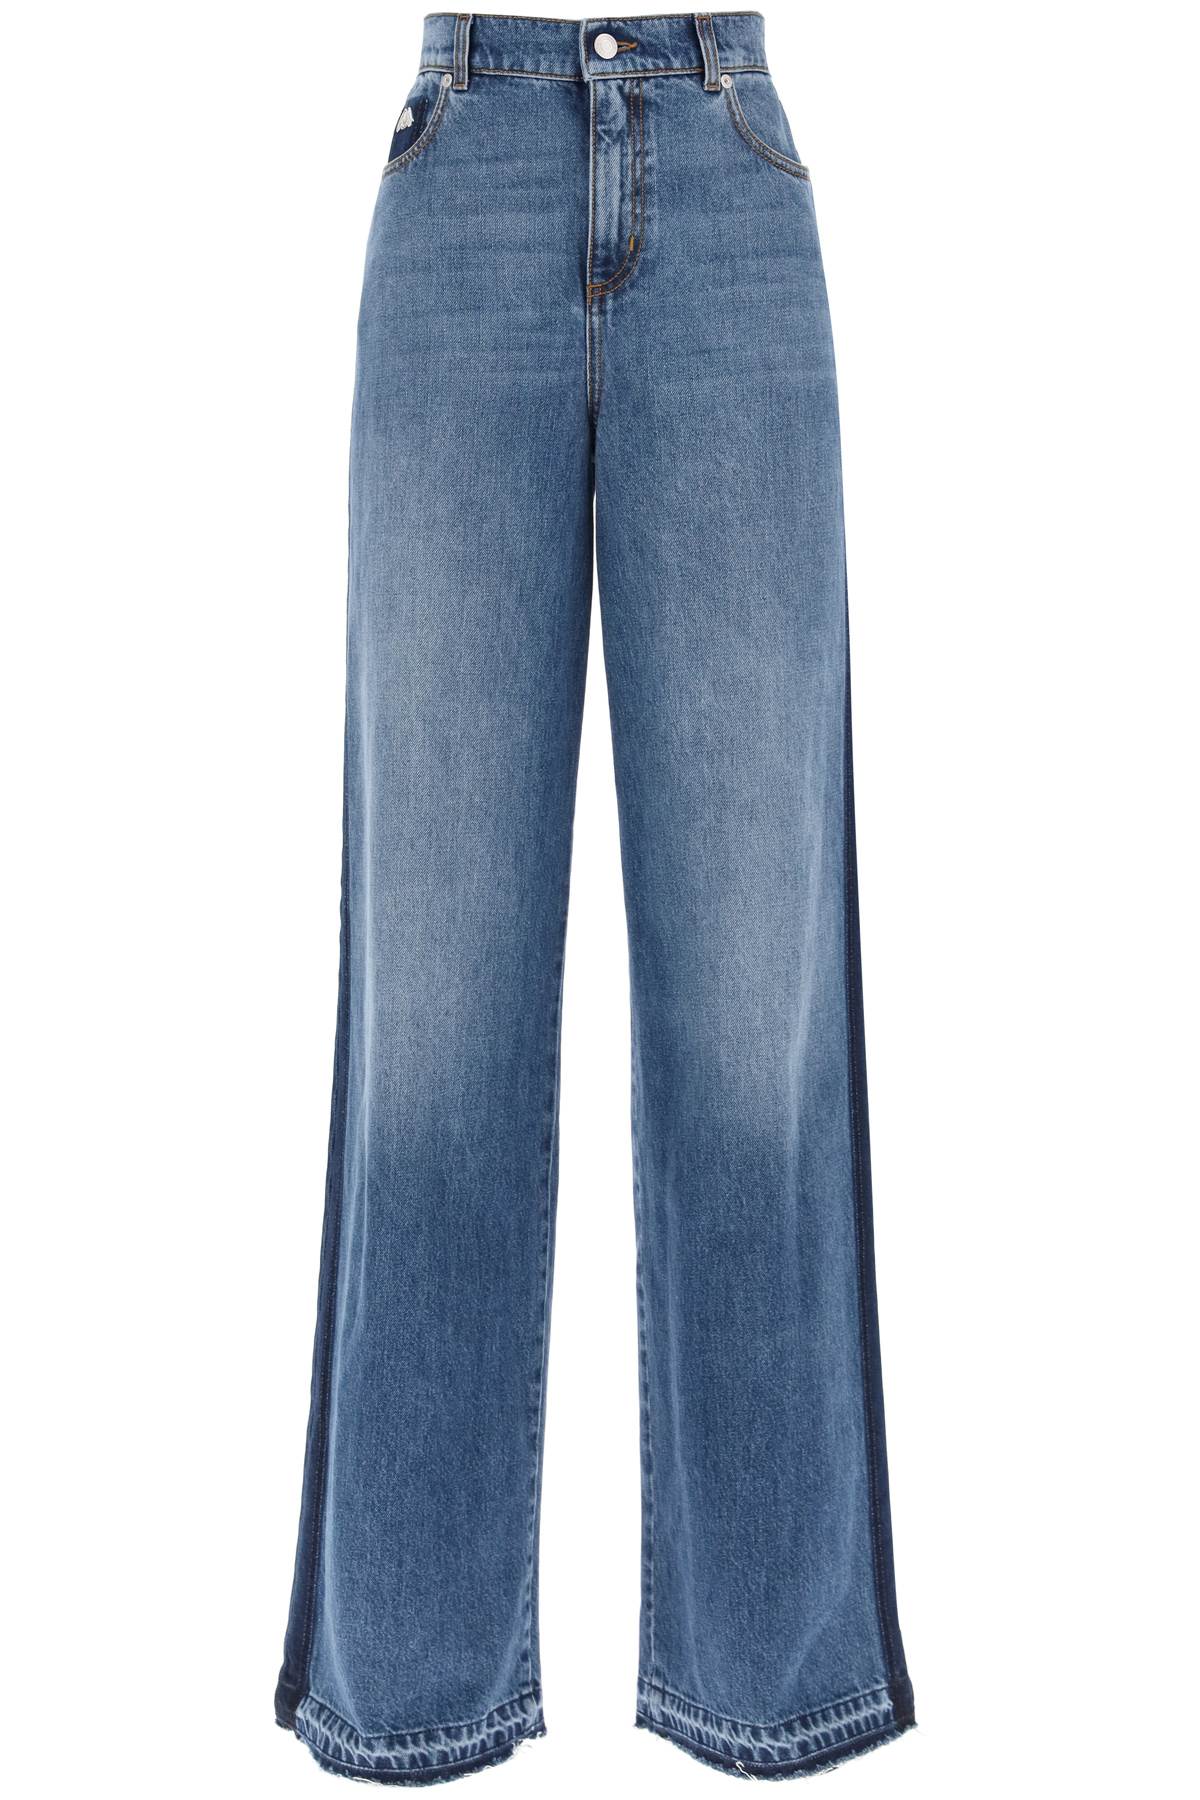 Alexander mcqueen wide leg jeans with contrasting details-0